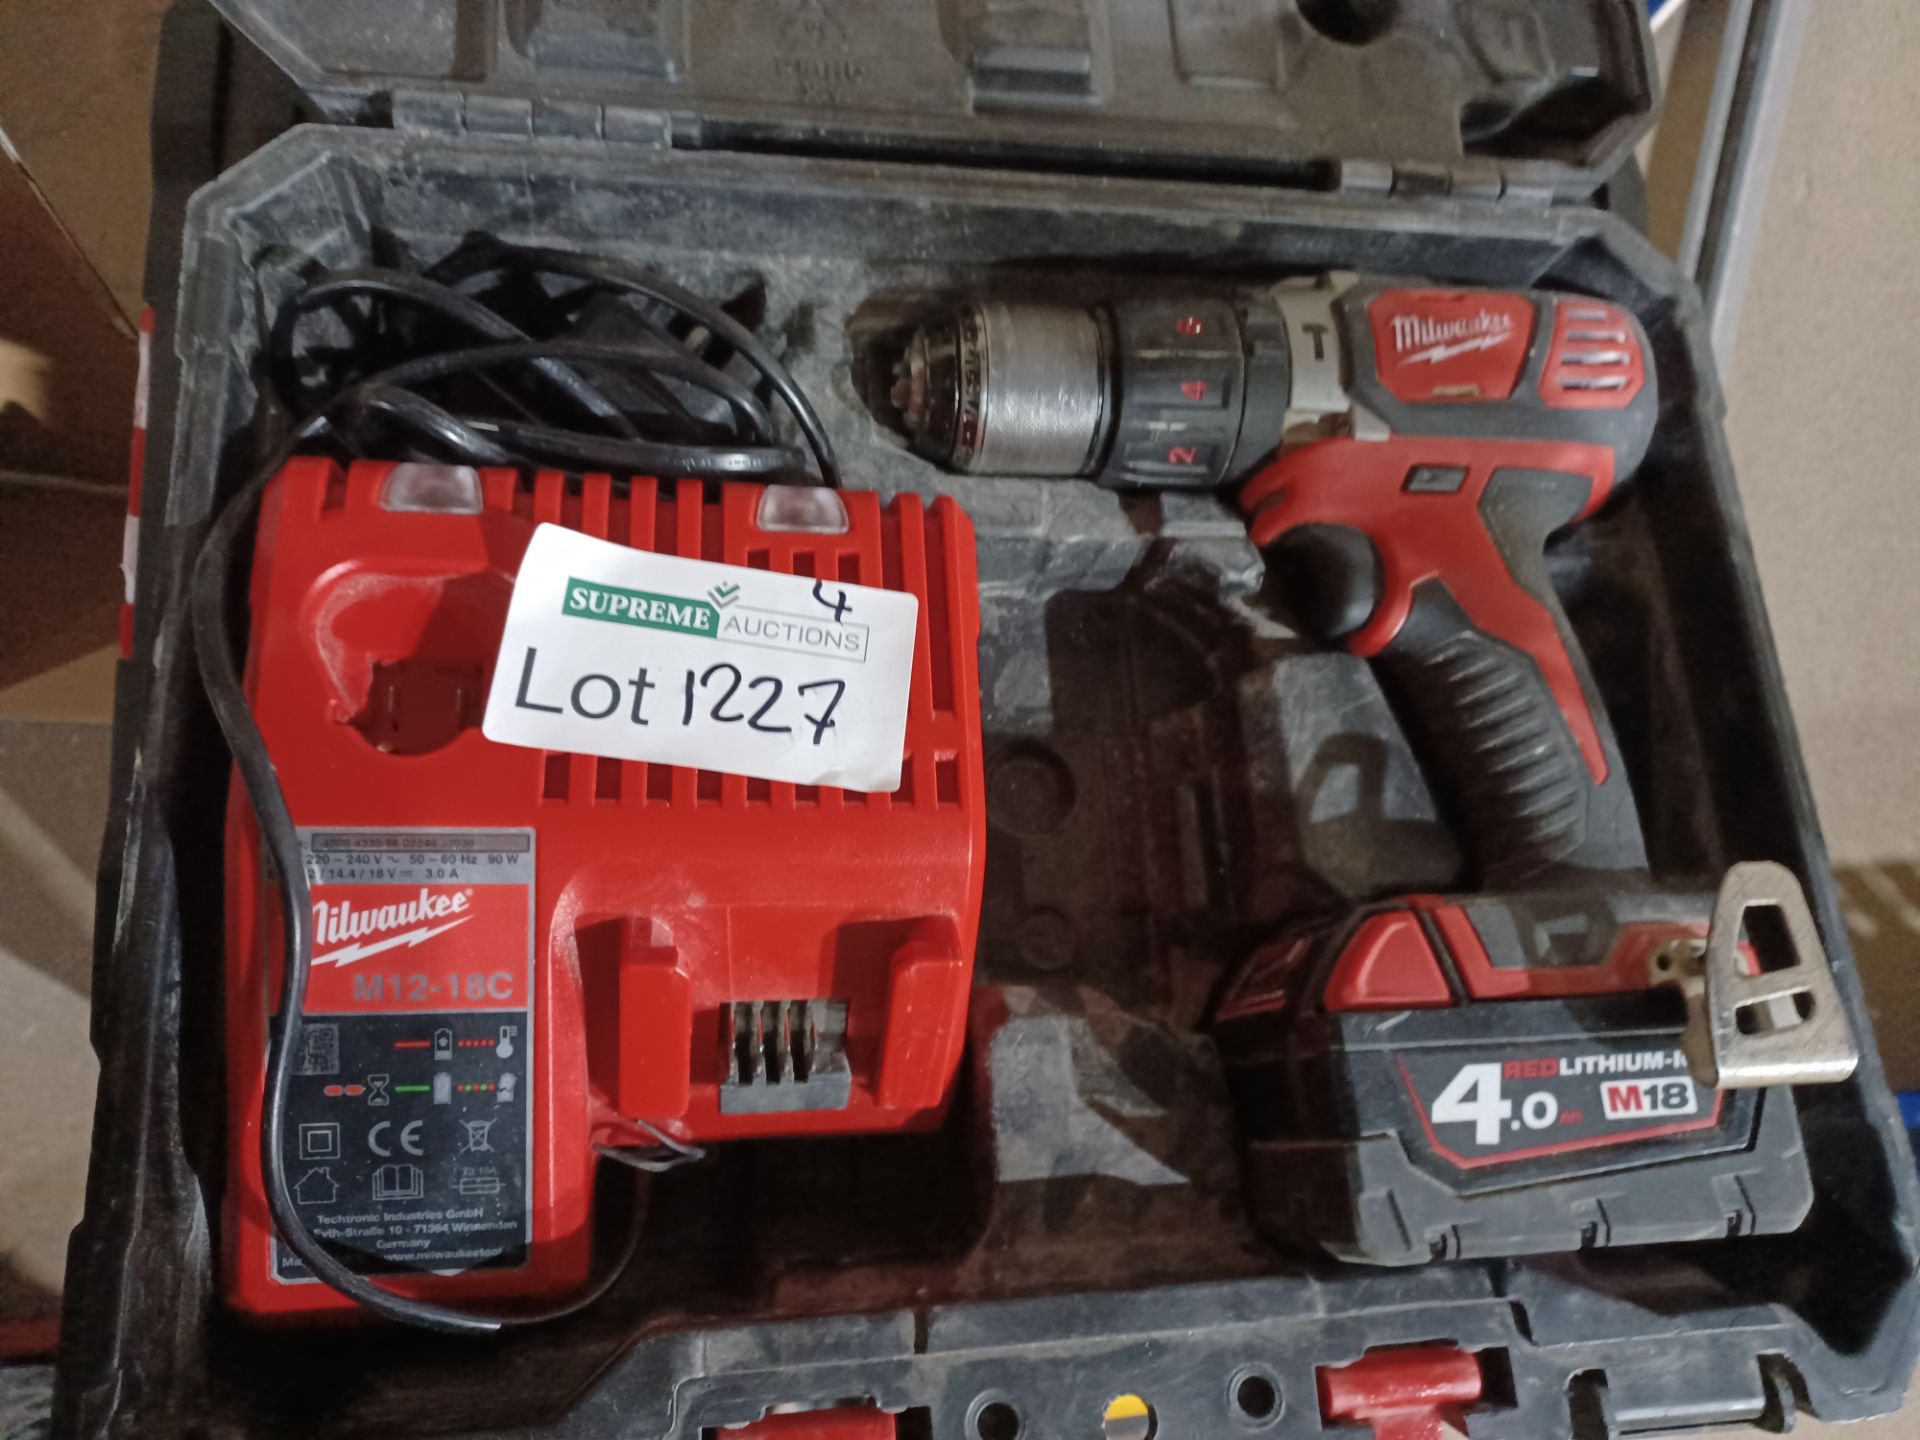 MILWAUKEE M18 BPDN-402C 18V 4.0AH LI-ION REDLITHIUM CORDLESS COMBI DRILL, INCLUDES CHARGER, BATTERY,